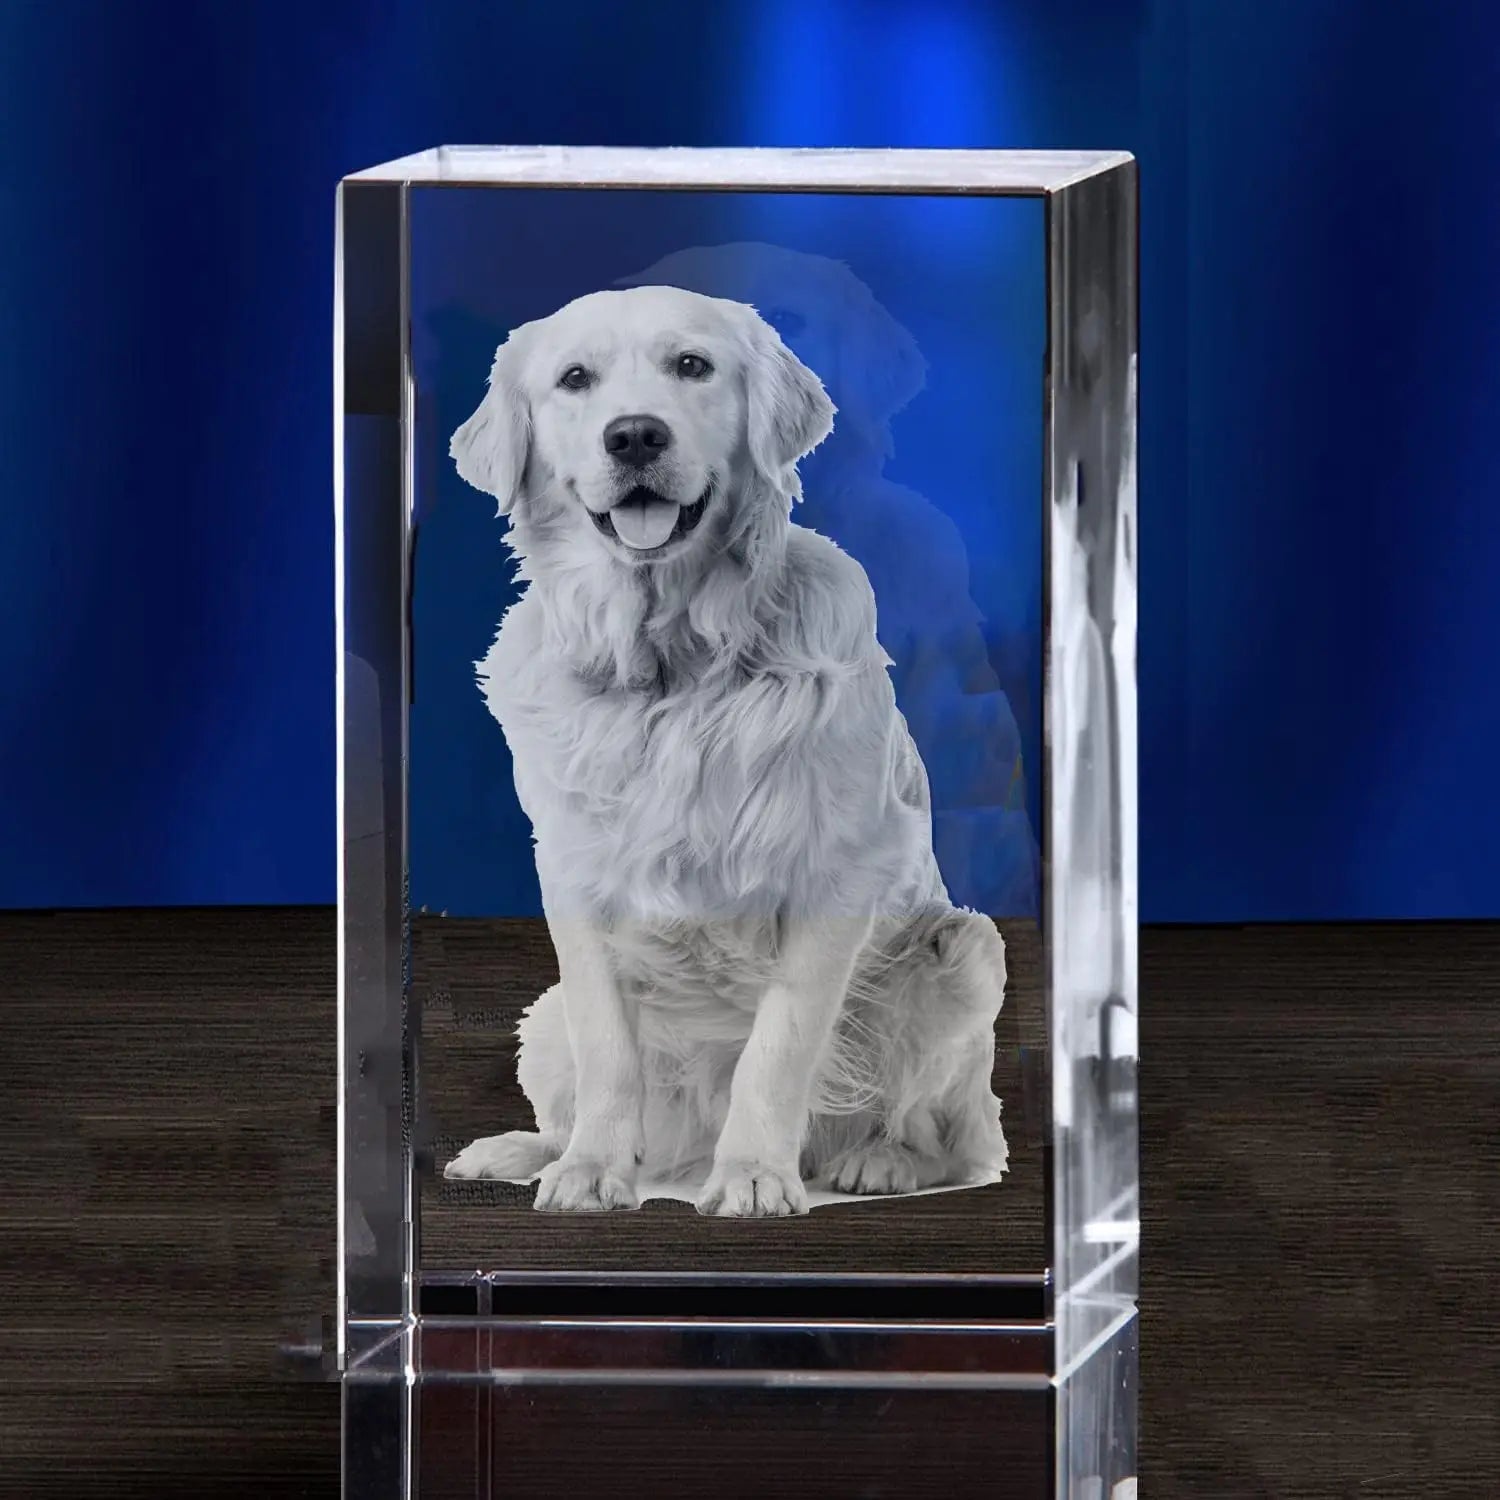 Personalized Sympathy Tribute - Custom Gift for the Loss of a Beloved Pet, Crystal Decor Keepsake Offering as a Memorial for the Departed Loved One